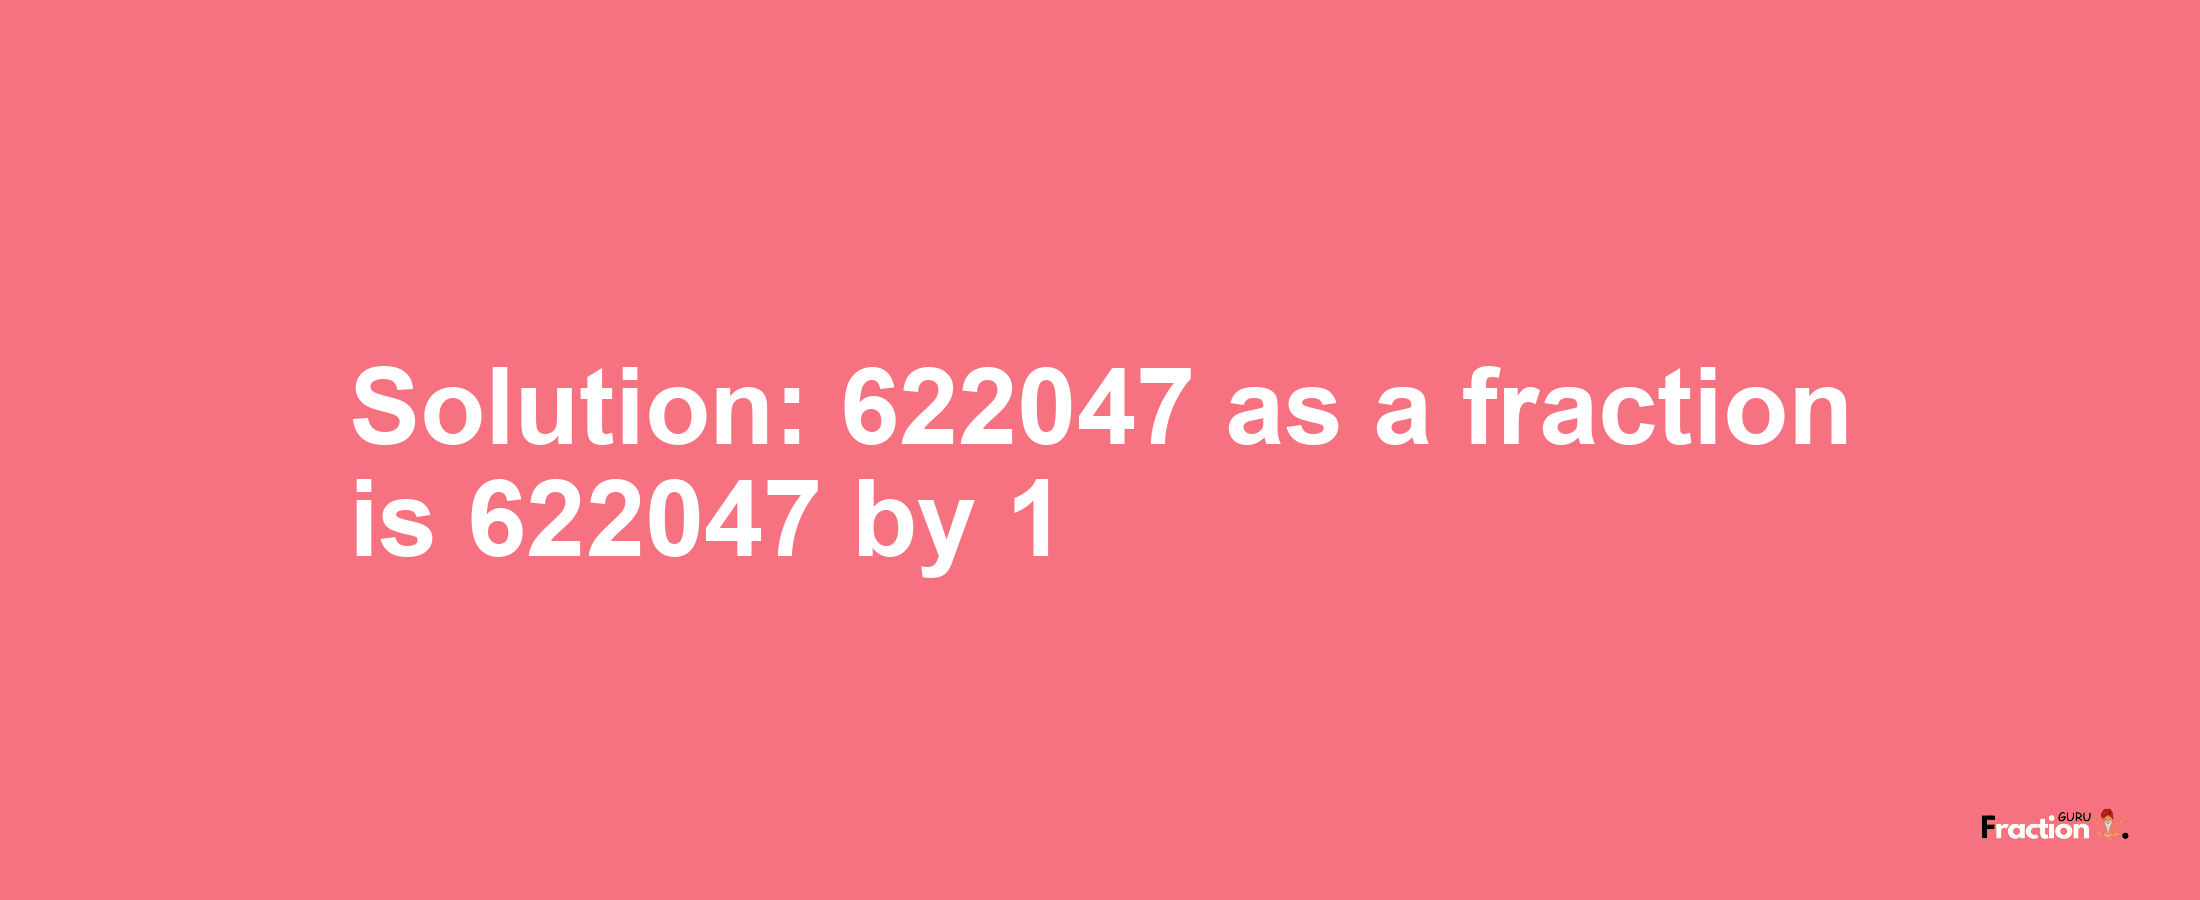 Solution:622047 as a fraction is 622047/1